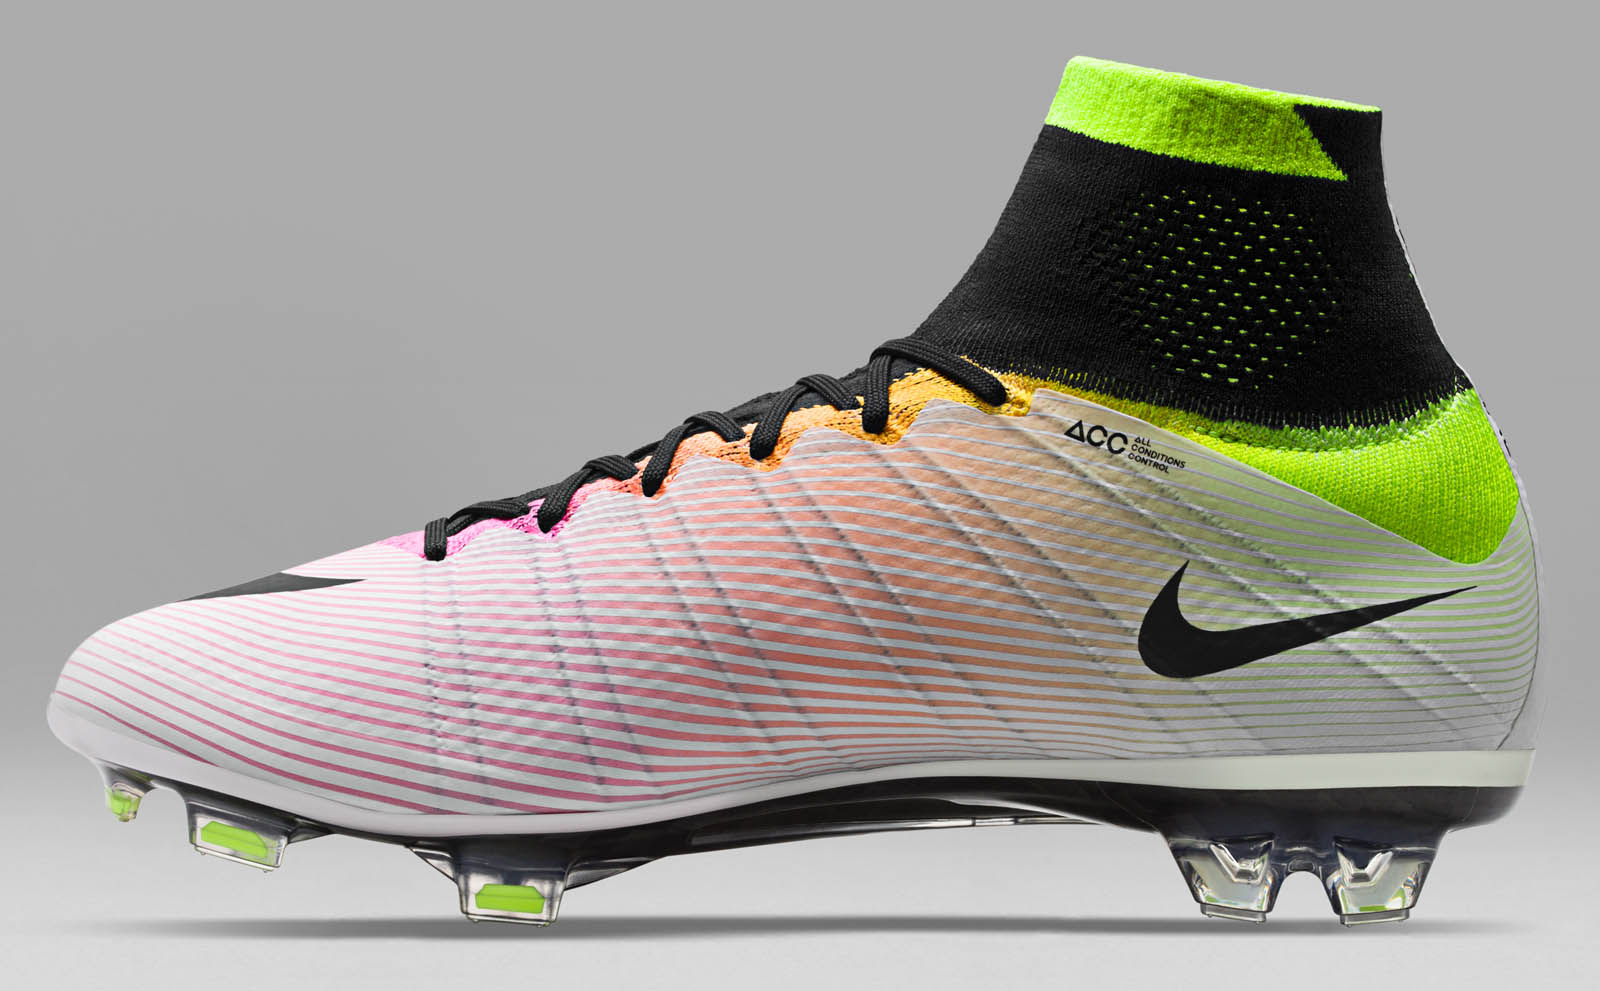 Unique Nike Mercurial Superfly 2016 Radiant Boots Released - Headlines